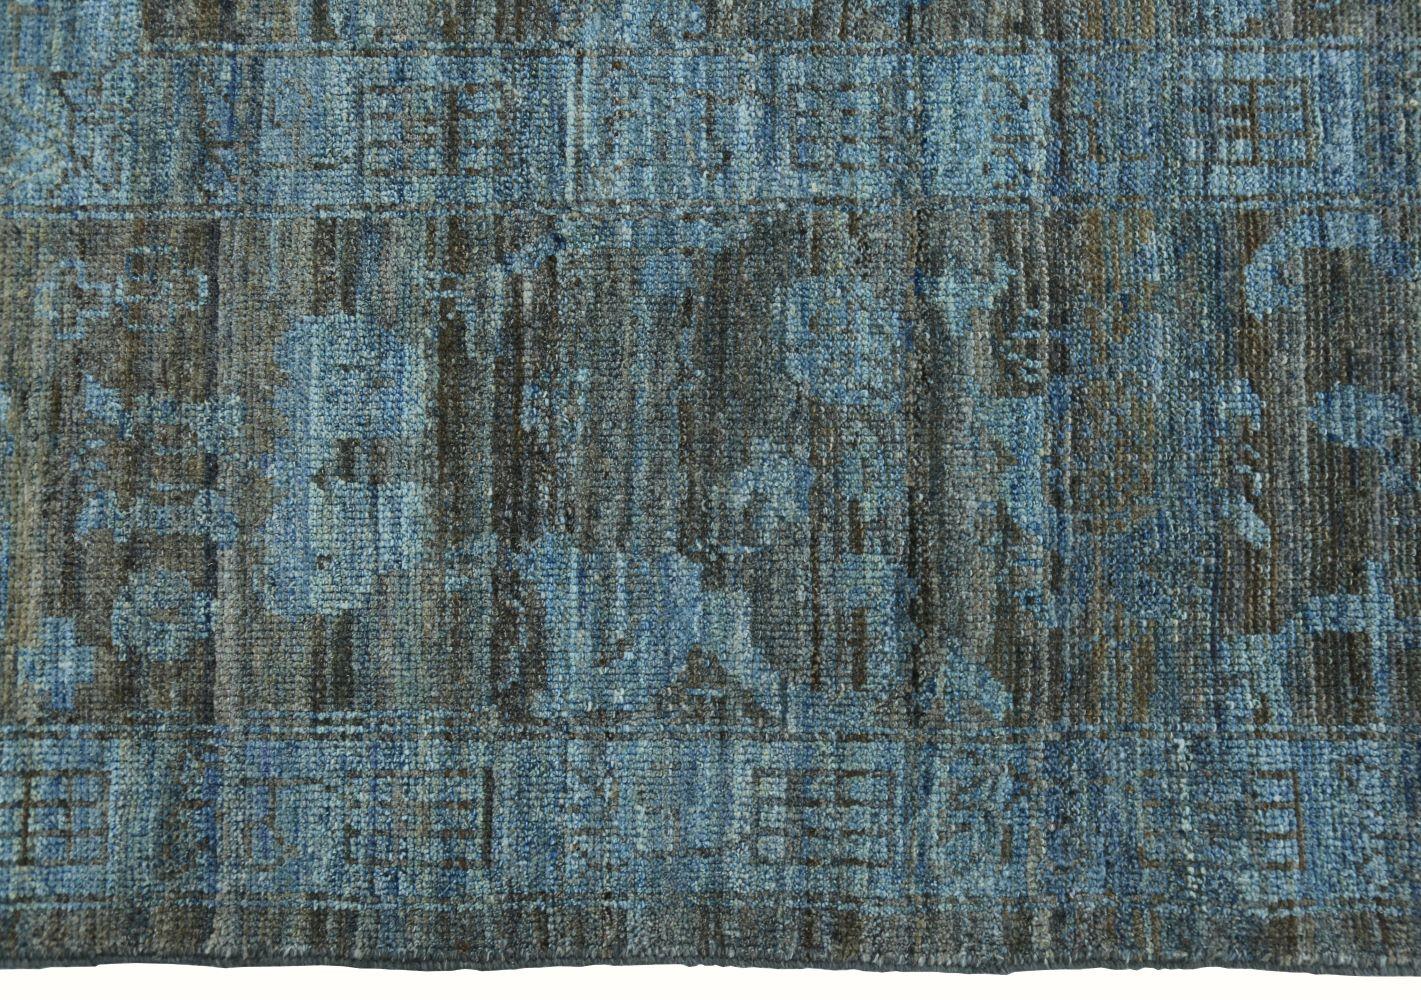 Hand-Knotted Modern Turkish Oushak Rug. Size: 10 ft 2 in x 14 ft (3.1 m x 4.27 m).